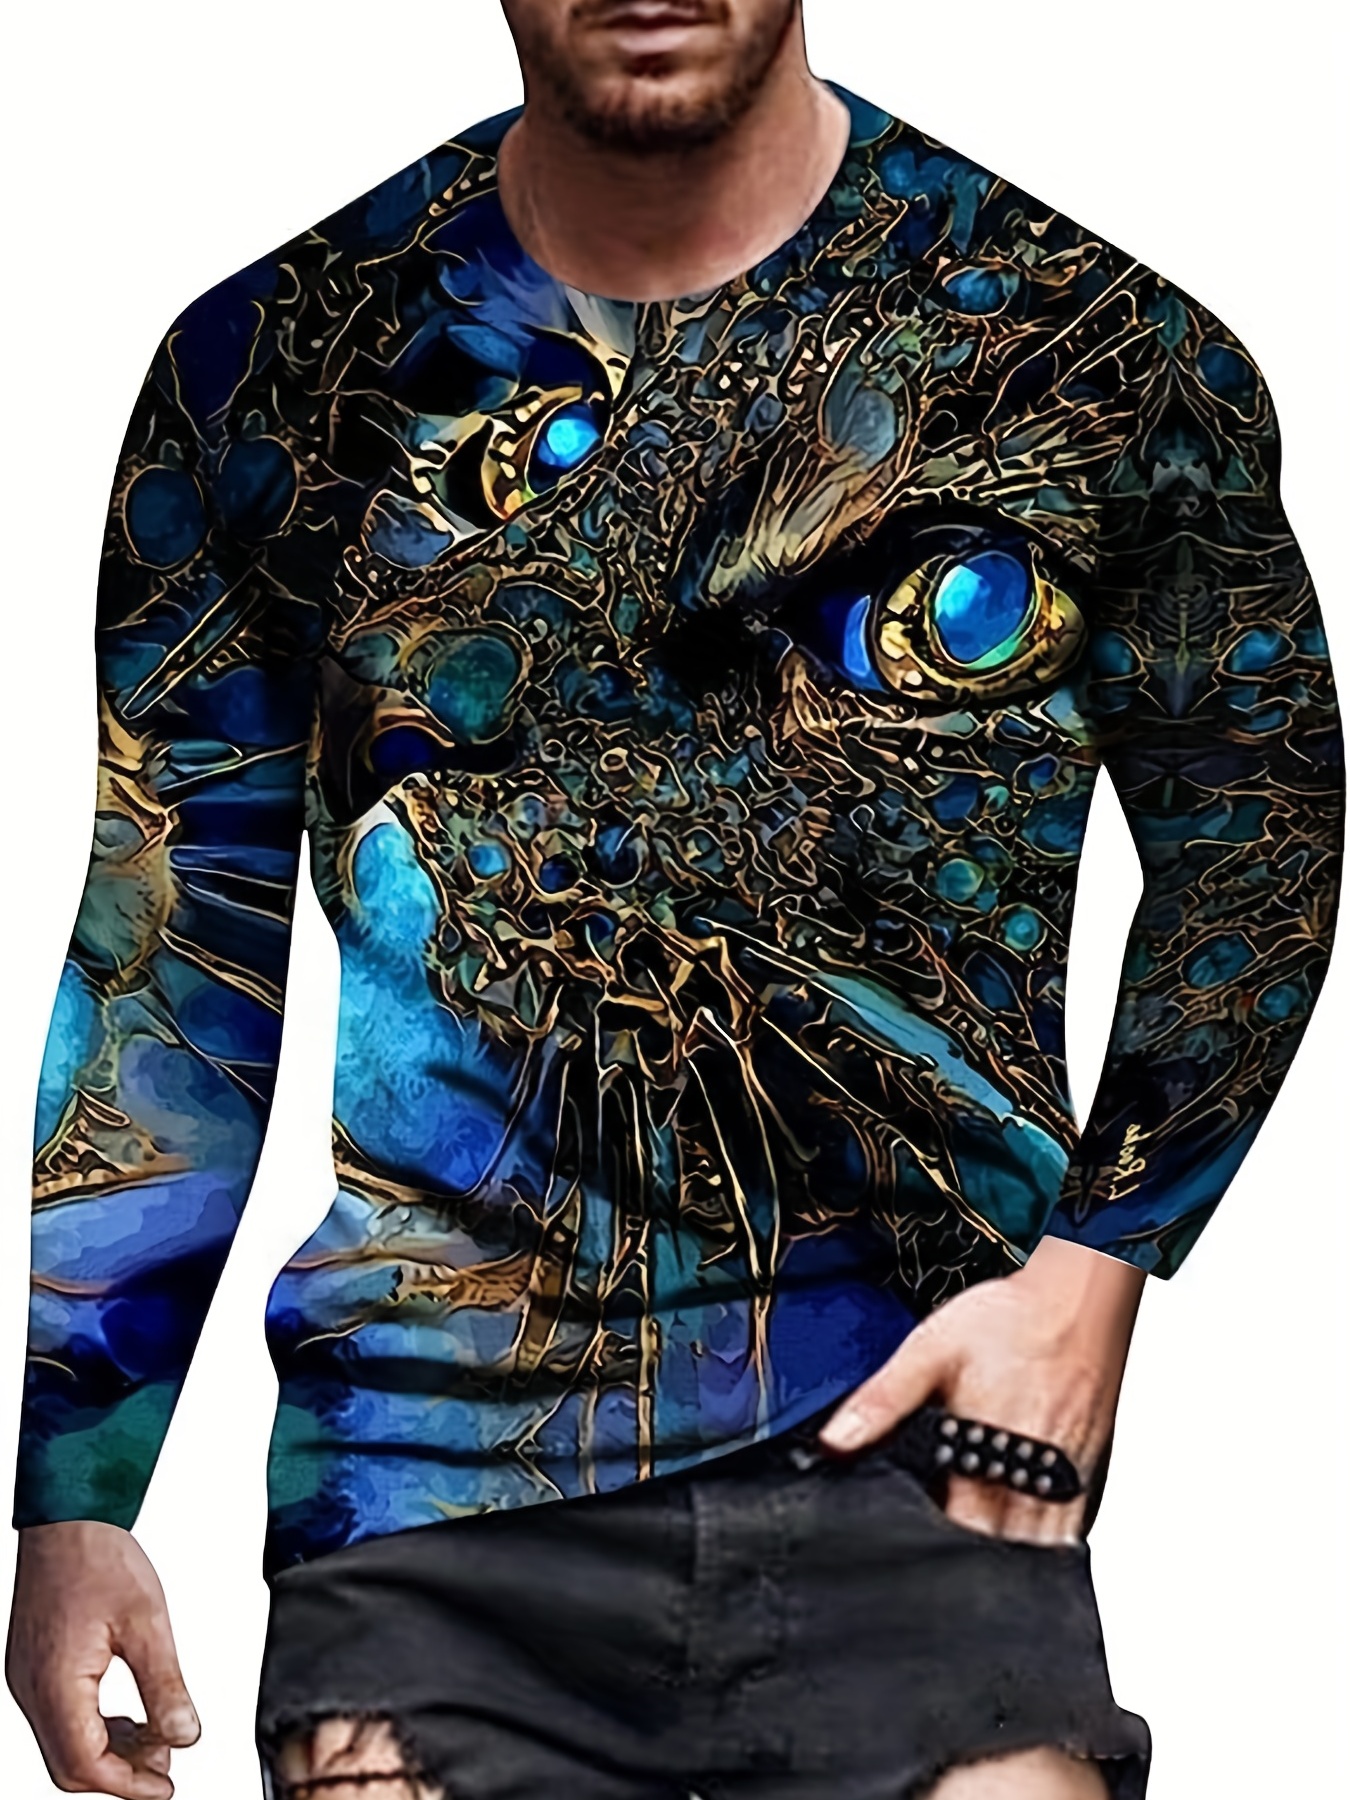 Paisley Pattern Print, Men's Graphic Design Crew Neck Long Sleeve Active  T-shirt Tee, Casual Comfy Shirts For Spring Summer Autumn, Men's Clothing  Top